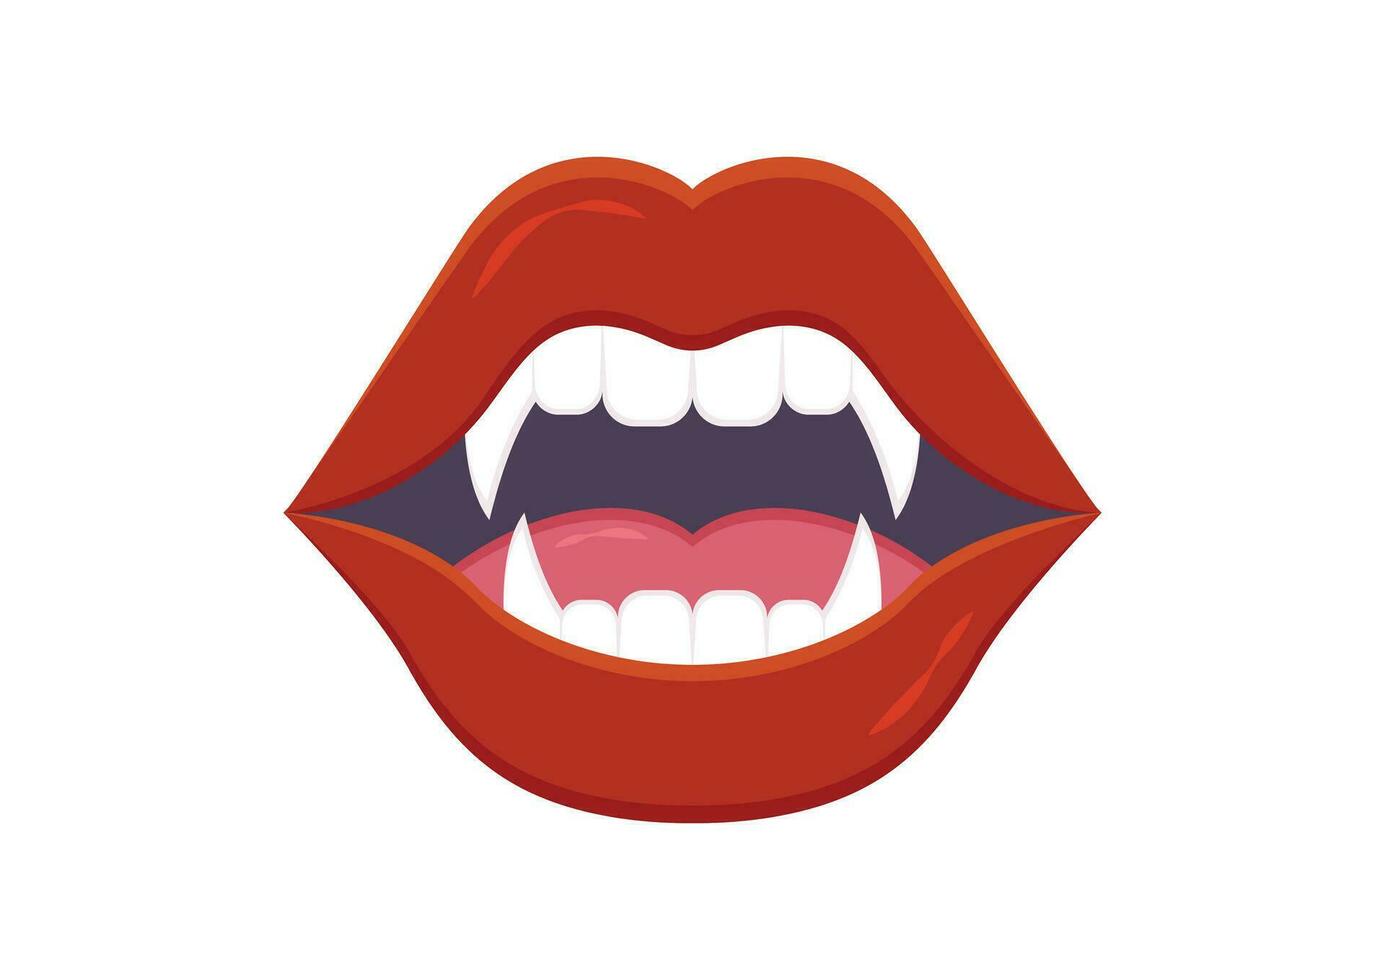 Vampire Mouth Teeth Vector Flat Design Isolated On White Background